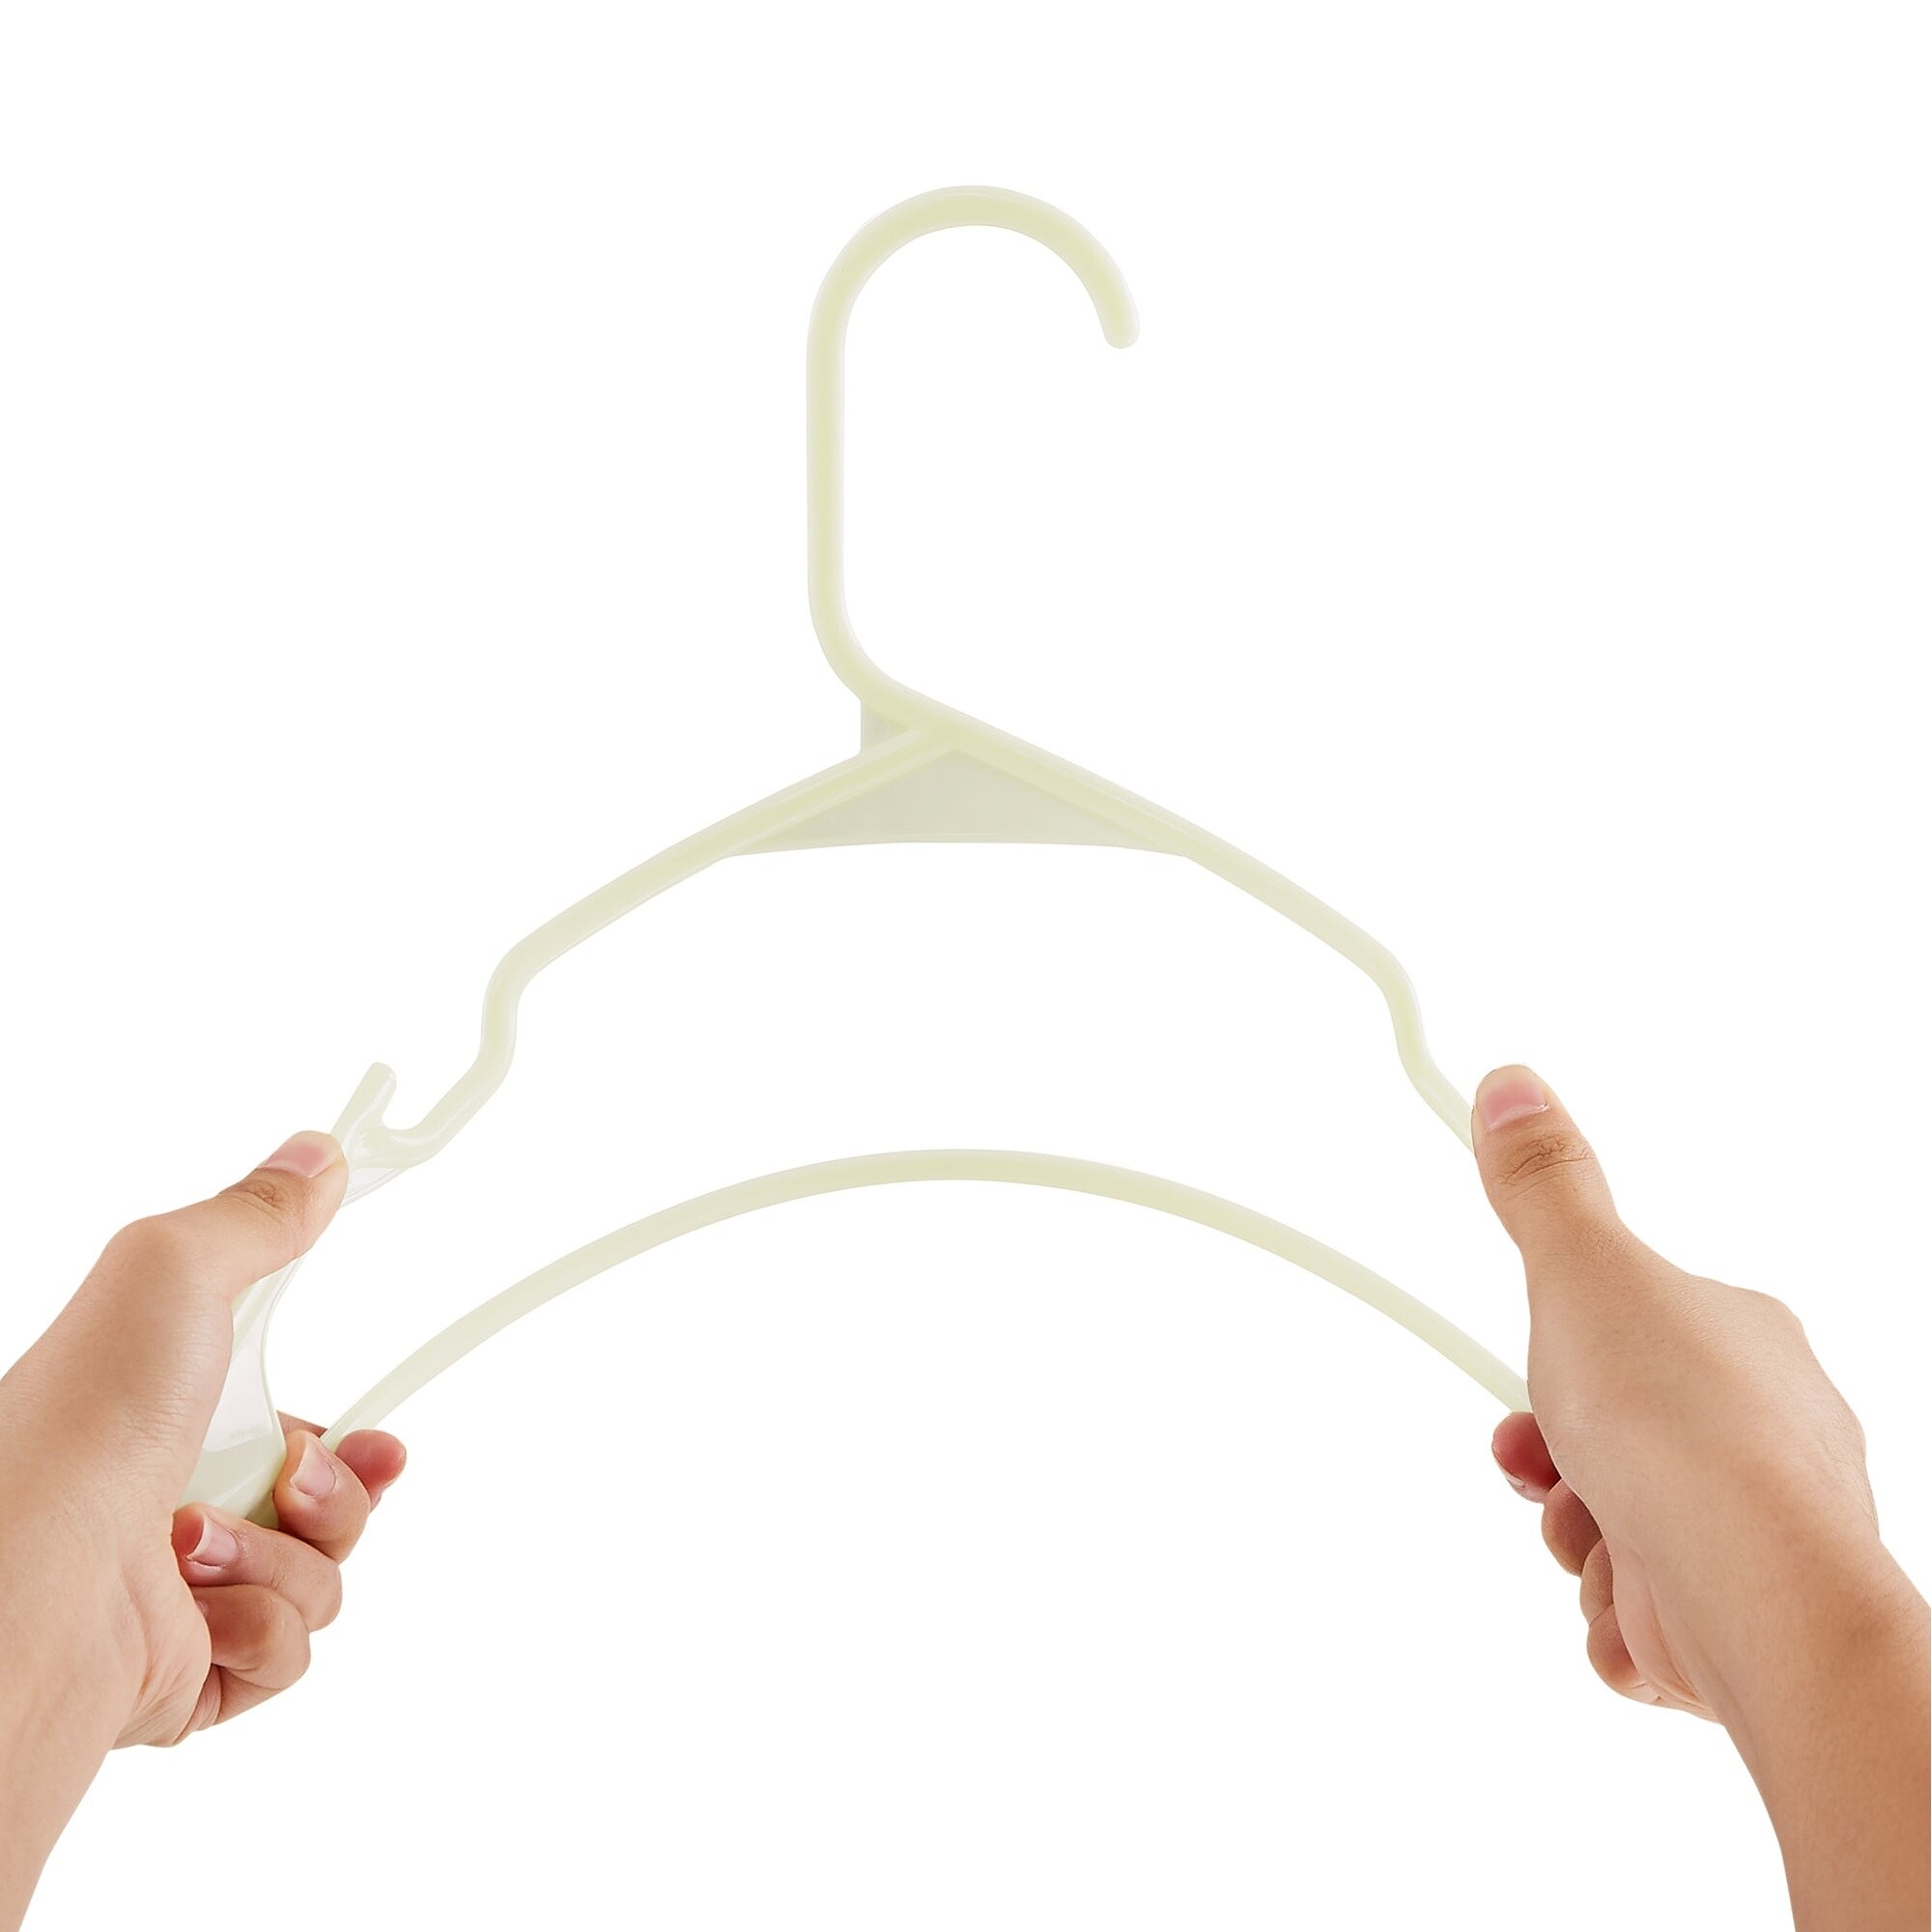 https://ak1.ostkcdn.com/images/products/is/images/direct/9619a0b3eef481bdc84ec8345391367ed35b3f2b/VECELO-Plastic-Adult-Hangers-Holds-Up-To-10-Lbs%2825-50-Packs-Option%29%2C-Clothes-Hangers.jpg